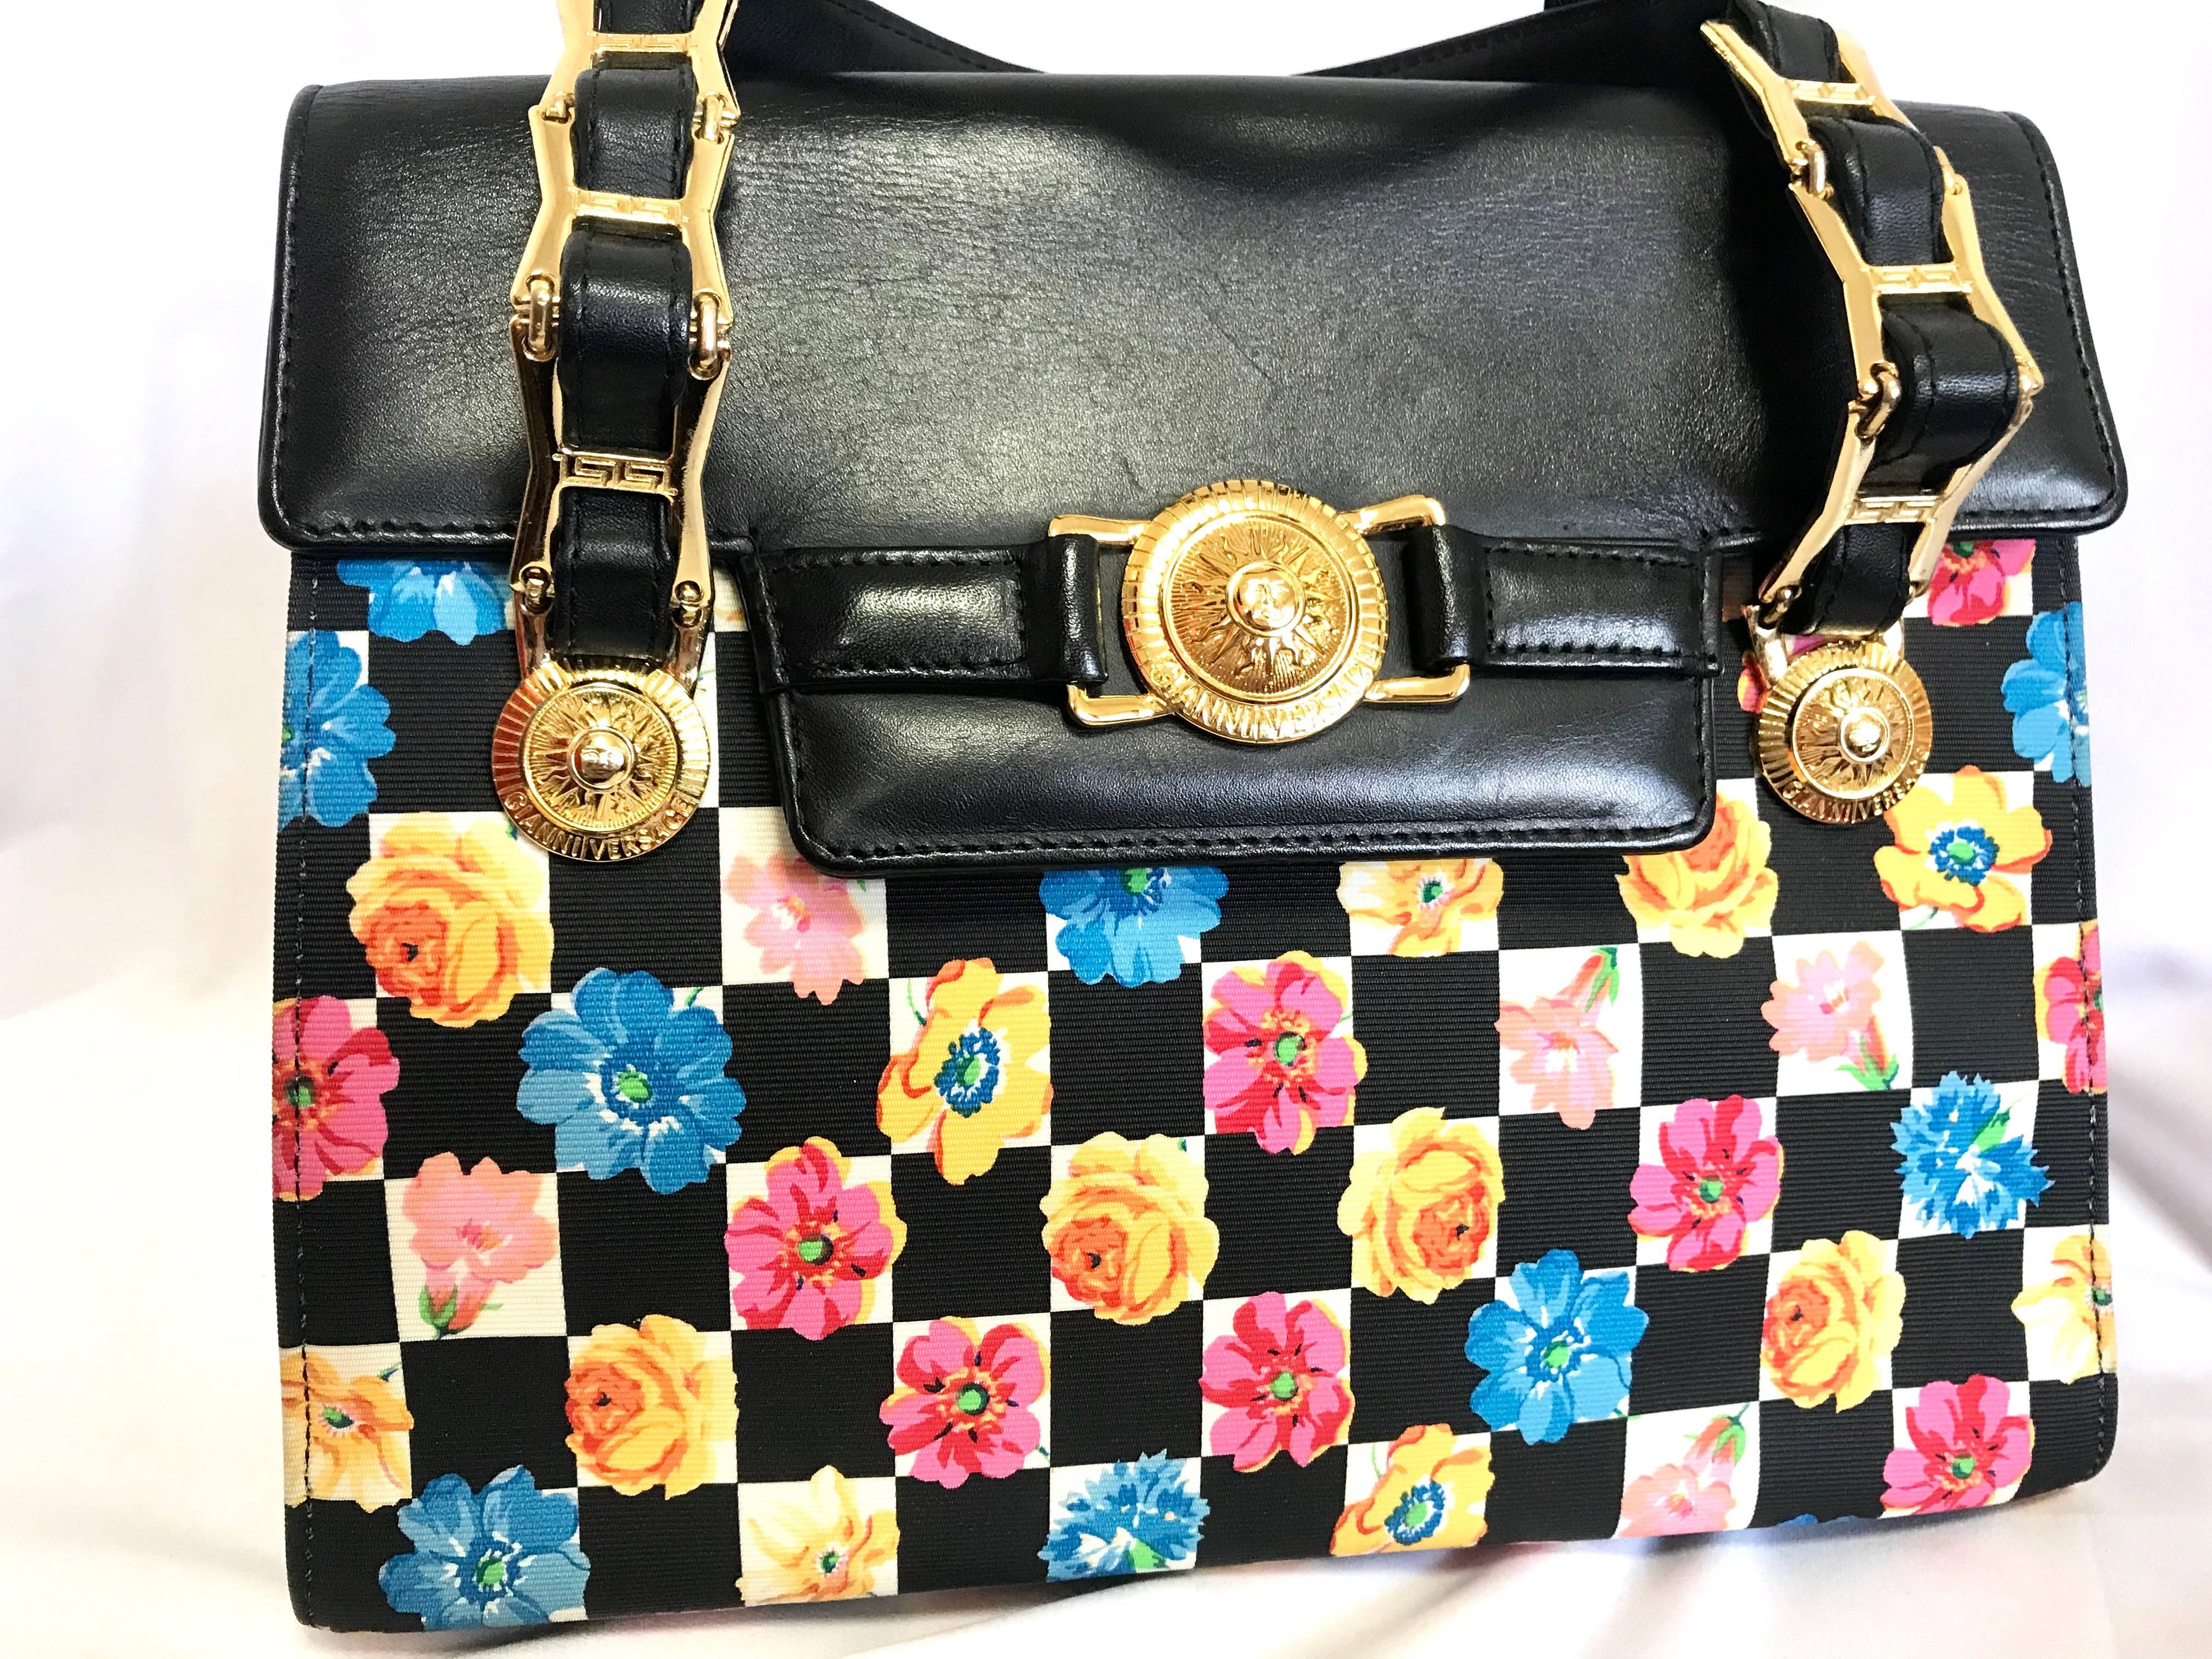 1990s. Vintage Gianni Versace black leather and pink, orange, and blue flower print handbag with golden hardware and sunburst motifs, Kelly handbag.

Introducing another rare vintage masterpiece from Gianni Versace back in the 90's.
If you are